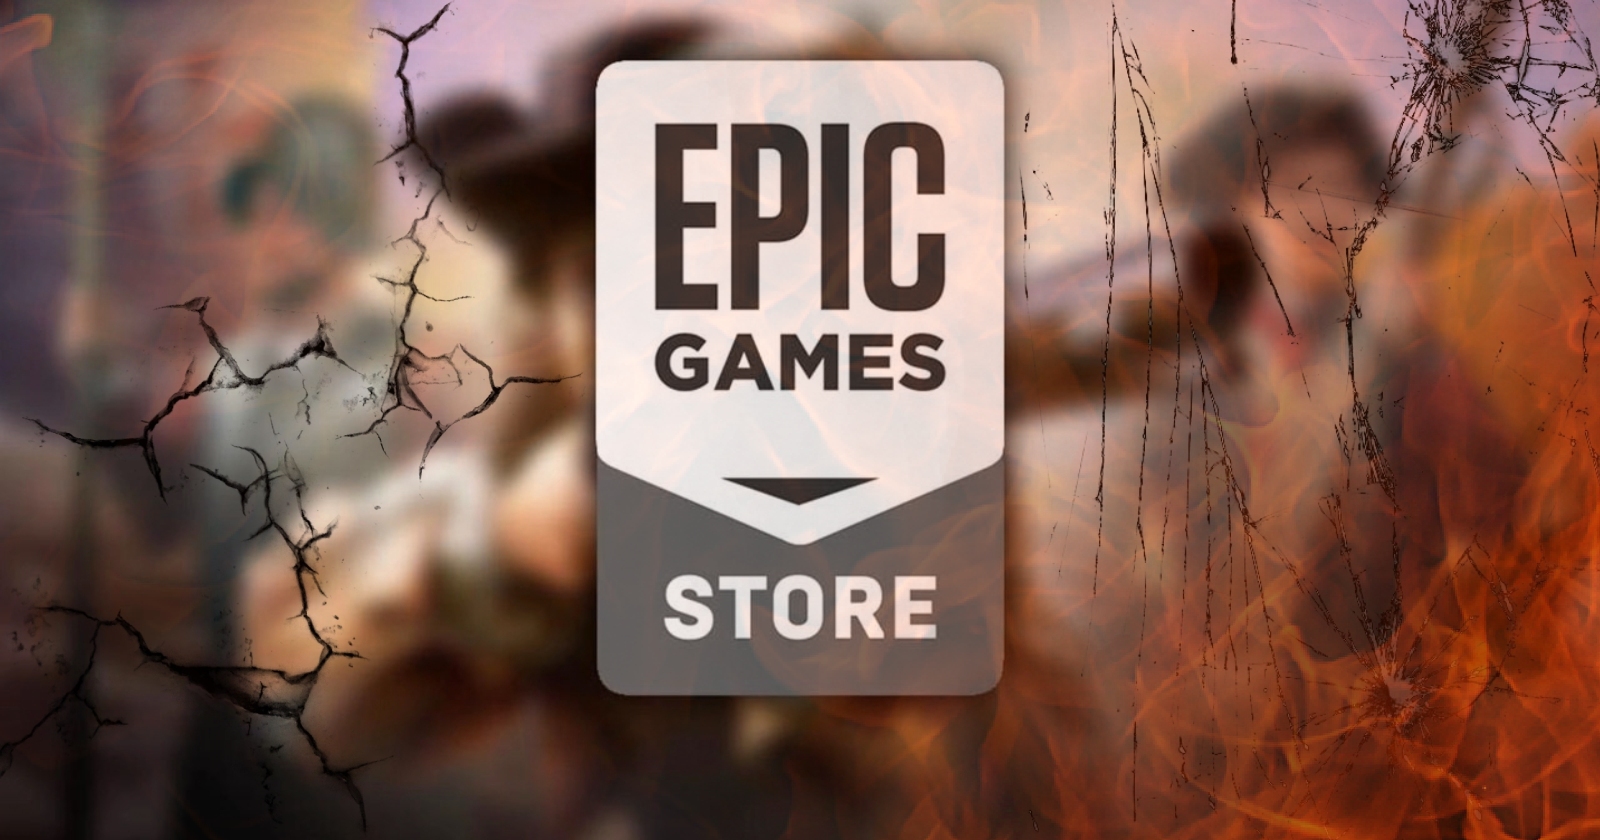 Two iconic games are free at Epic Games!